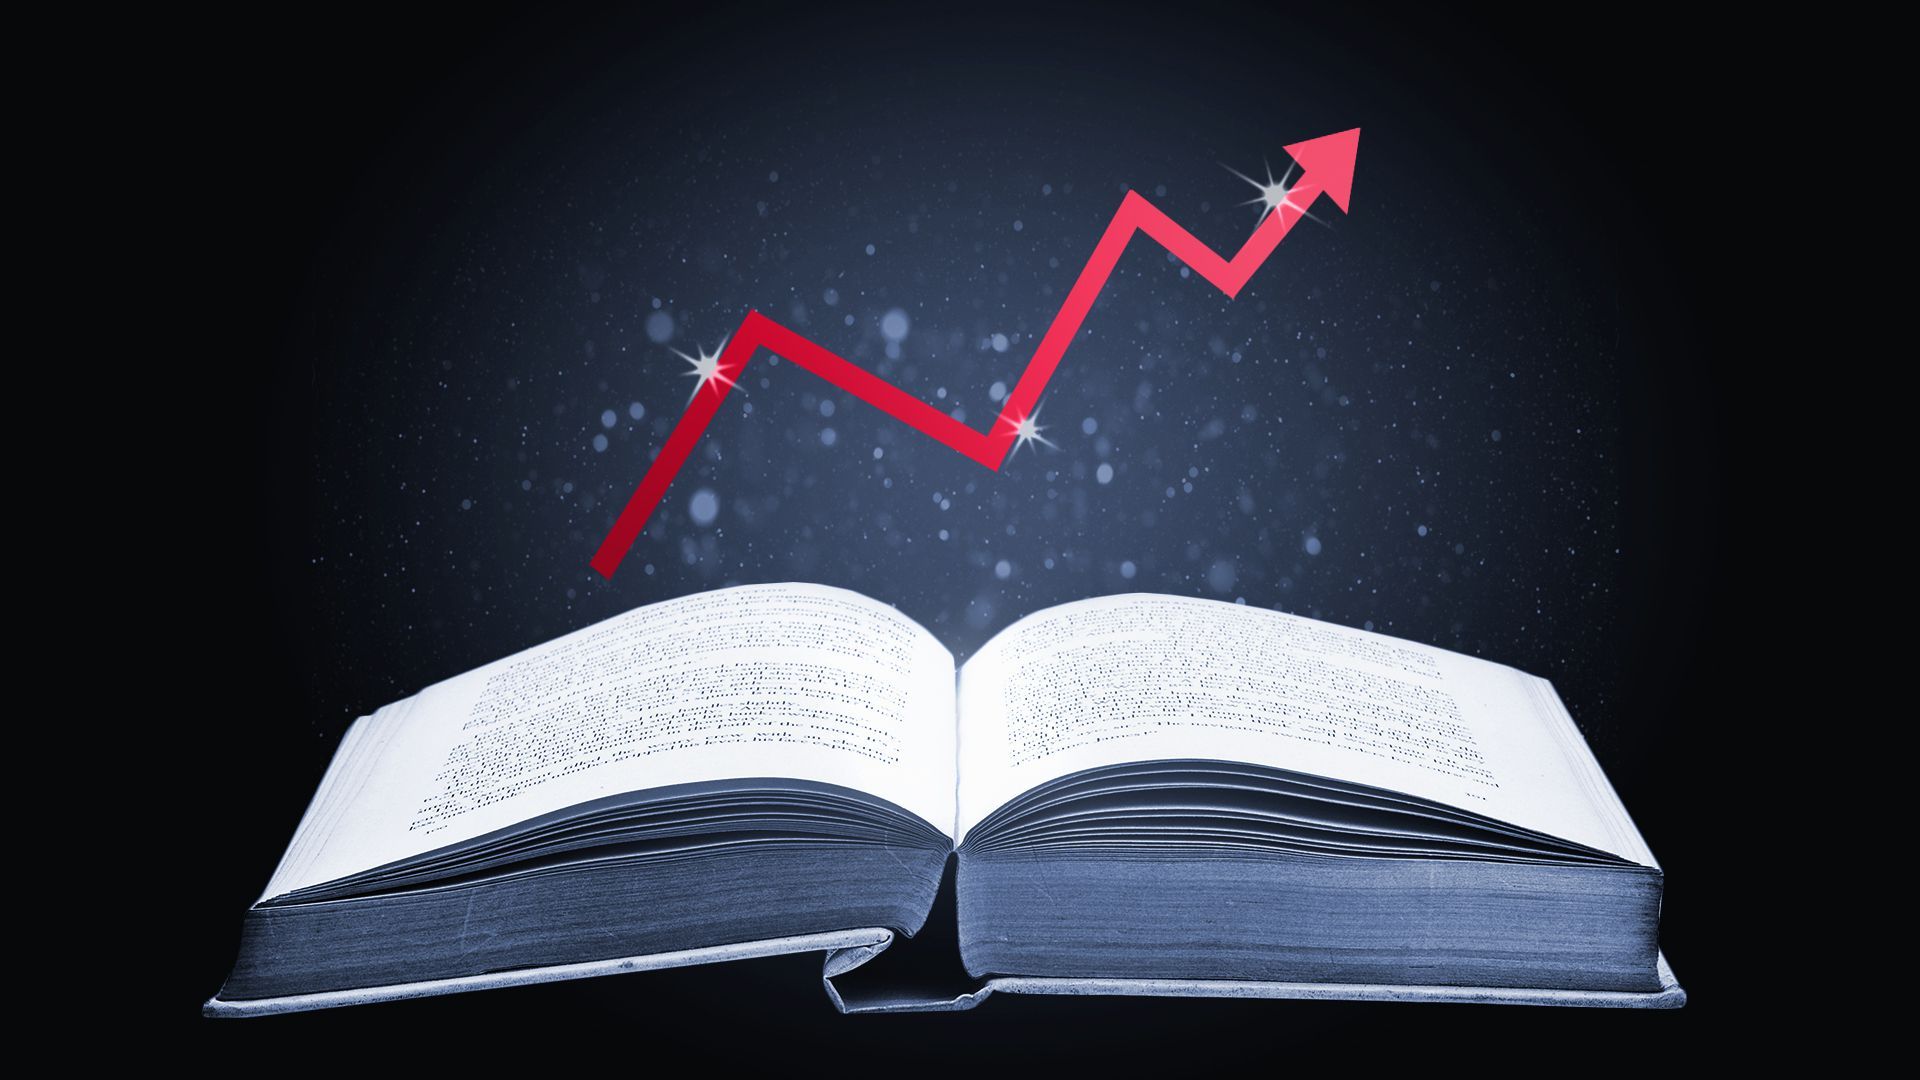 Illustration of an open storybook under a floating upward trend line surrounded by sparkles